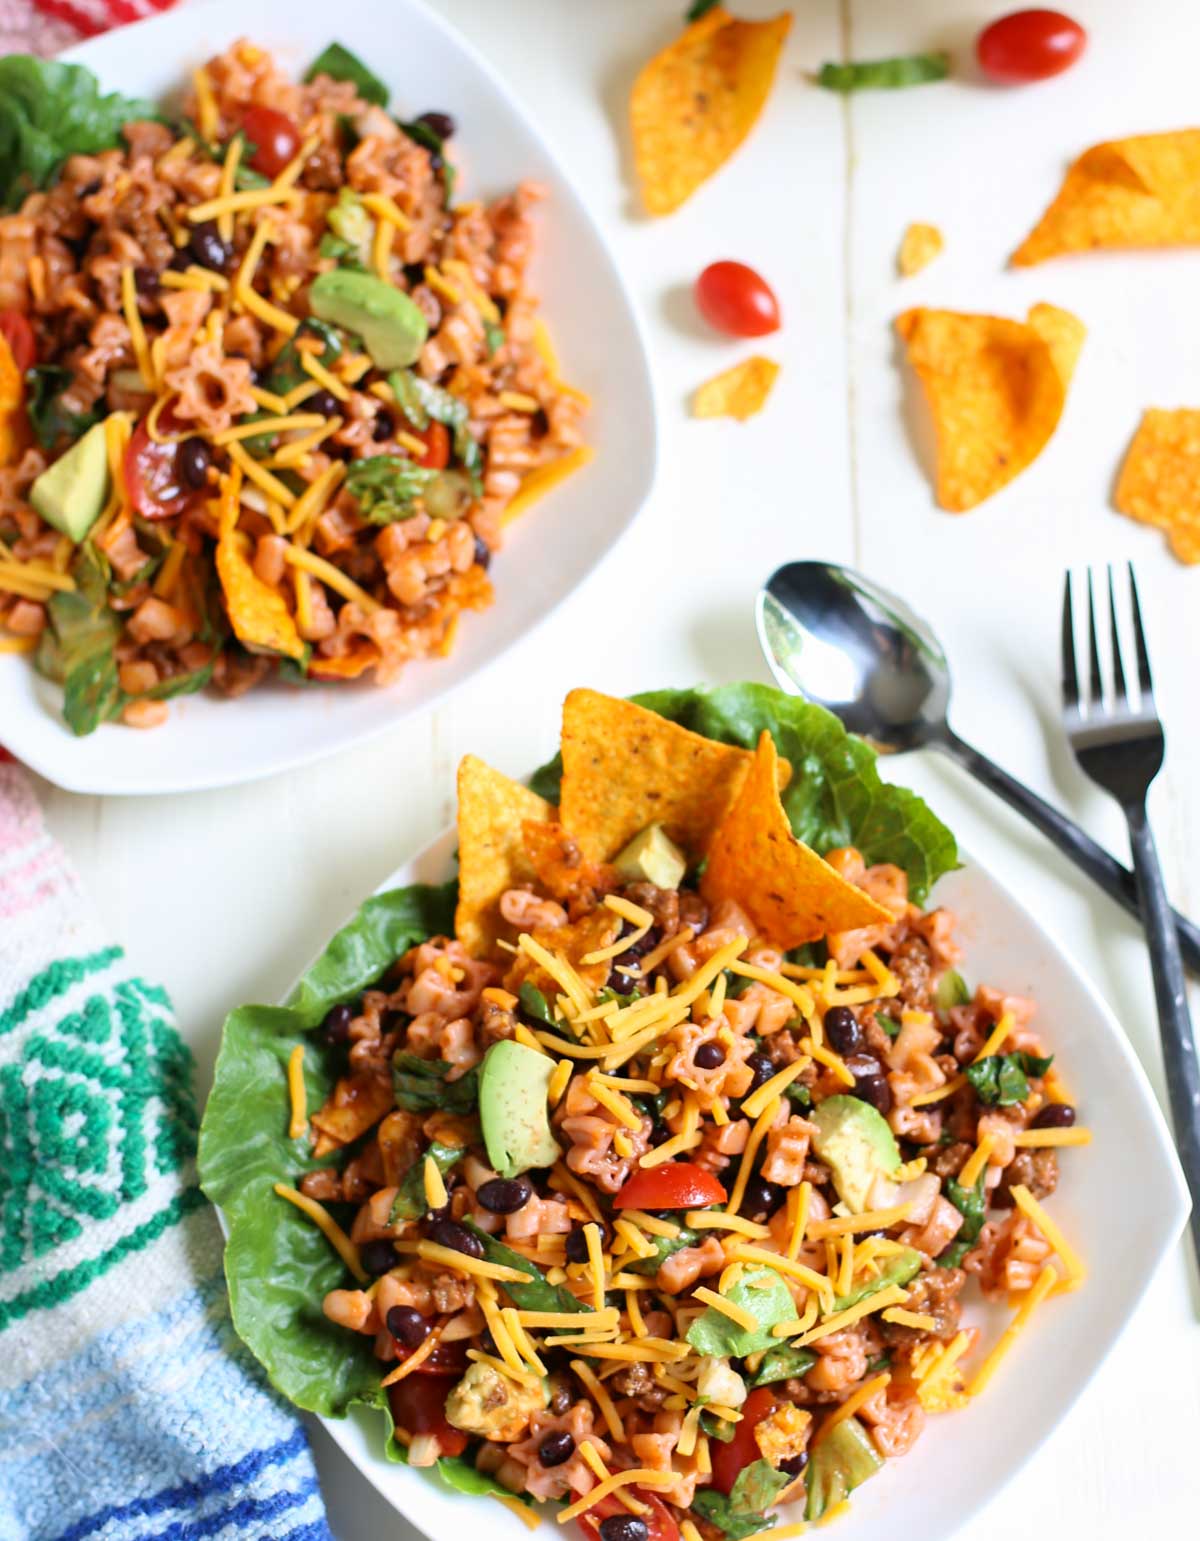 Mexican Chef Pasta Salad | Cha Cha Cha! Easy delish combo of sweet and tangy dressing with seasoned taco meat and fresh tomatoes, avocados and pasta. Add Doritos or corn chips - and the entire family goes crazy! A one pot yummy meal. Perfect for summer or beachside! | WorldofPastabilities.com